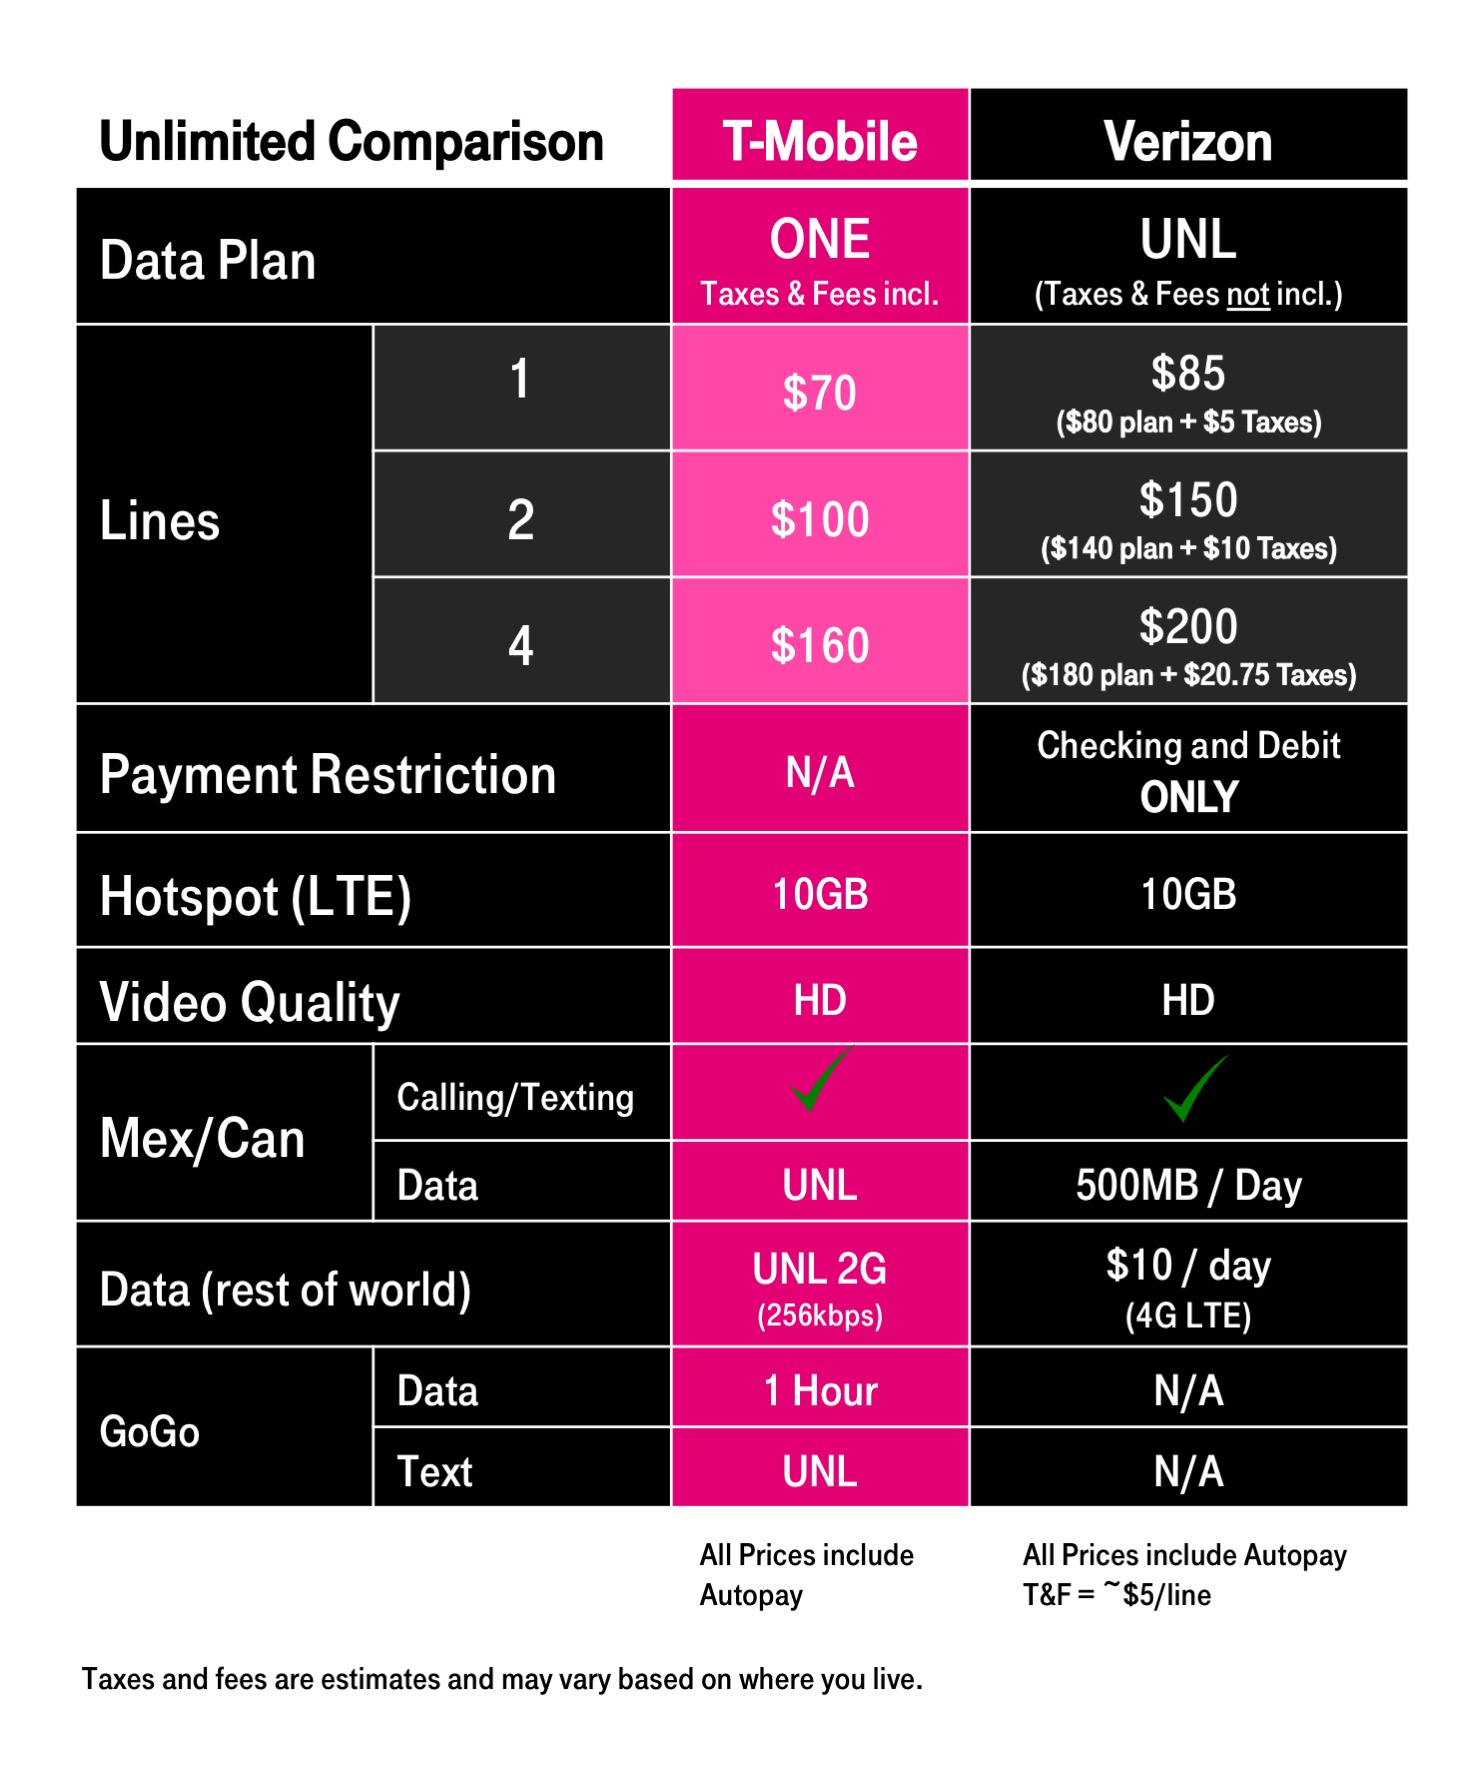 T-Mobile ONE Unlimited Plan to Now Offer HD Video and 10GB High-Speed Hotspot Data, Your Move Verizon